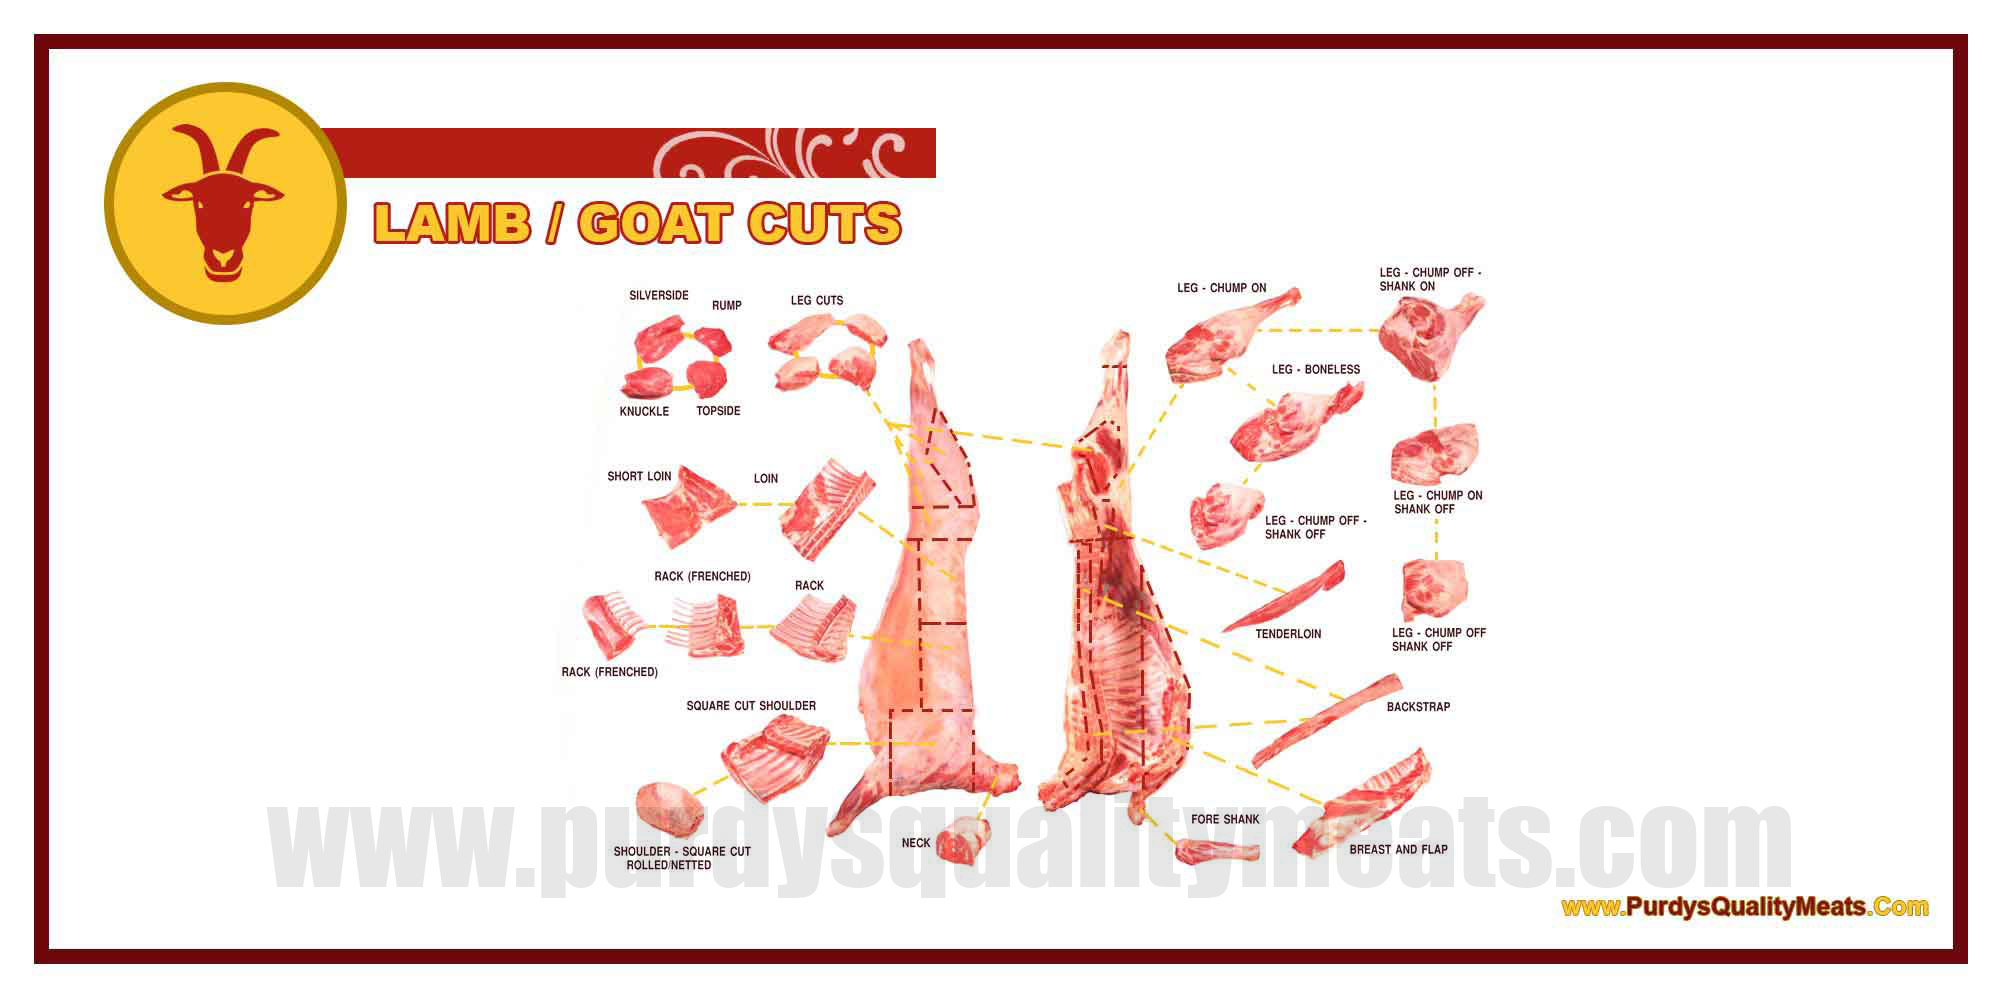 This image icon displays the Purdy's Quality Meats Lamb / Goat Cuts image